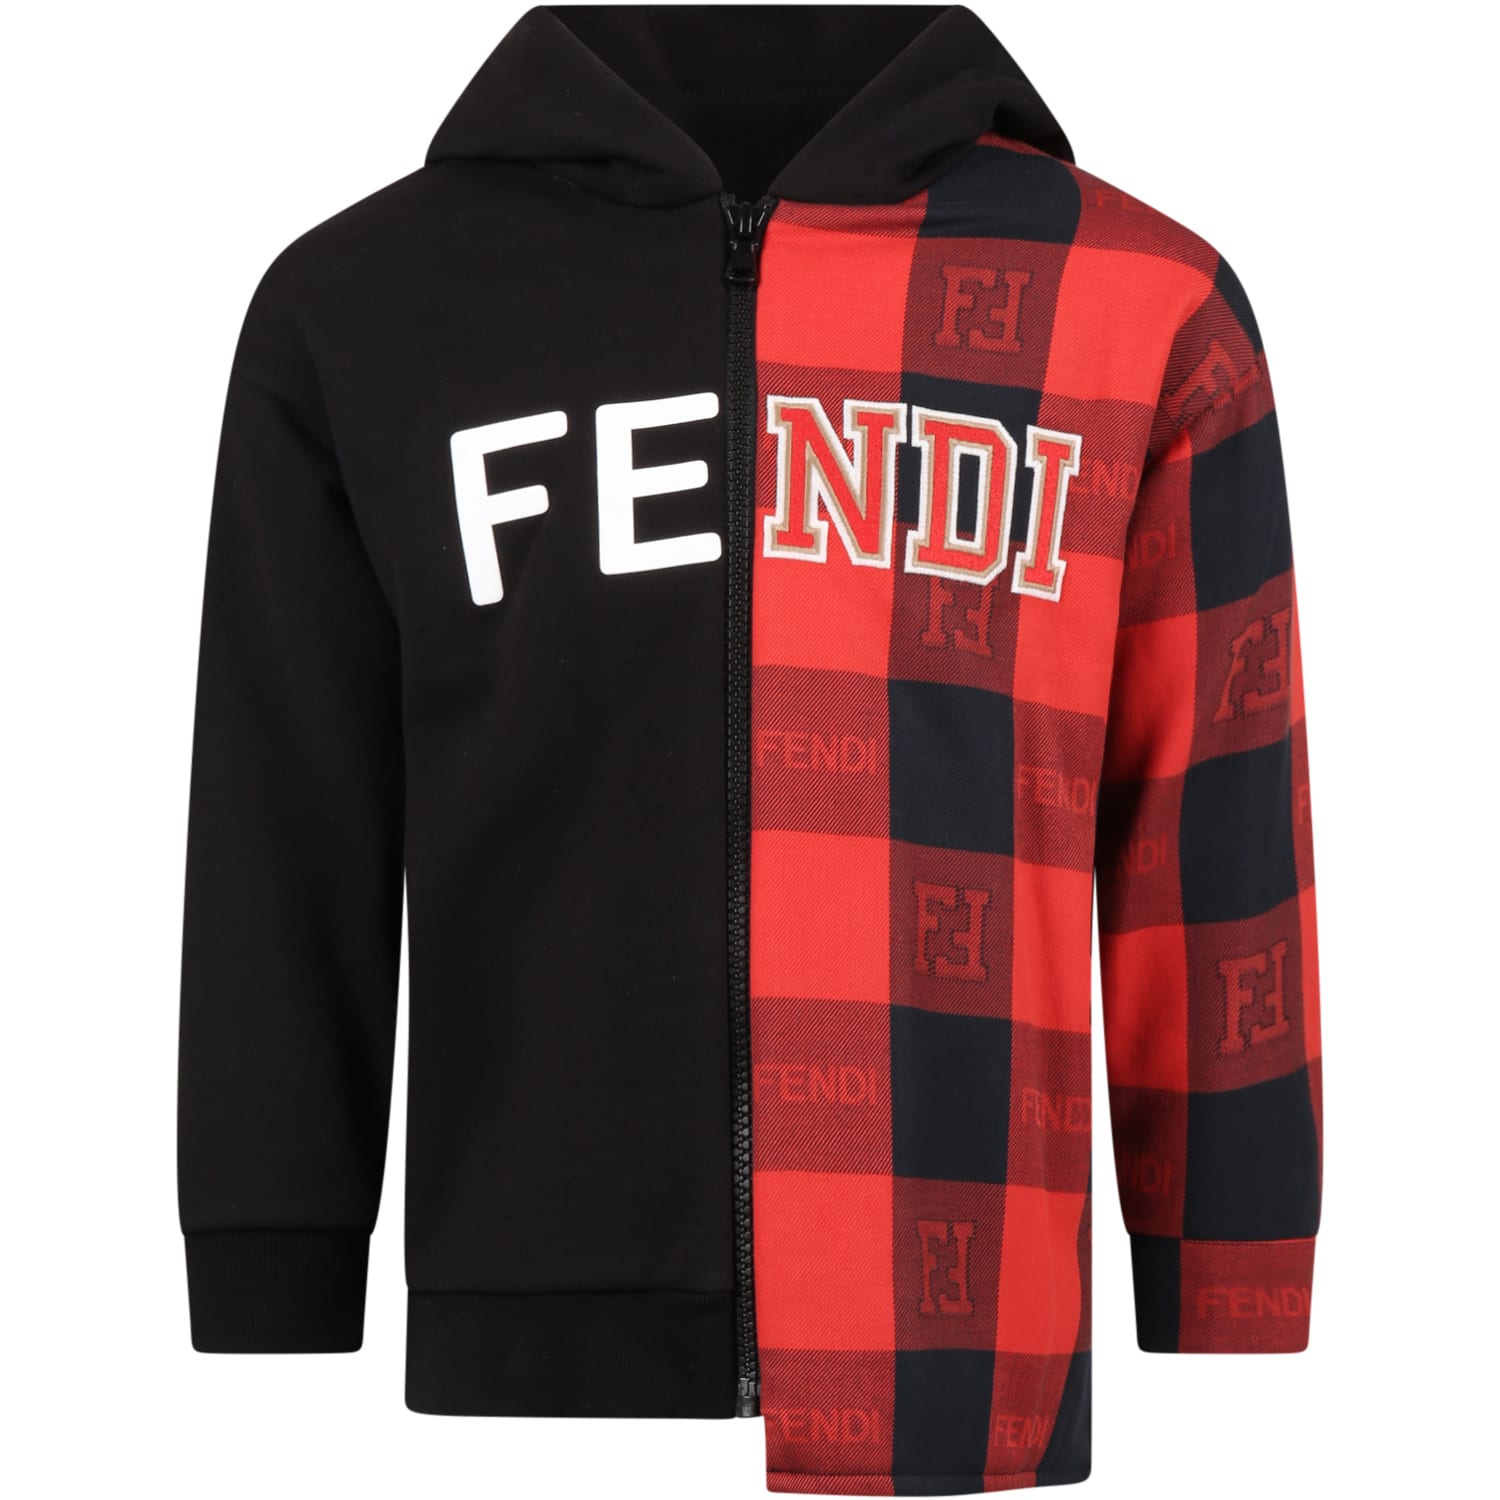 Fendi Black Sweatshirt For Kids With Red Check